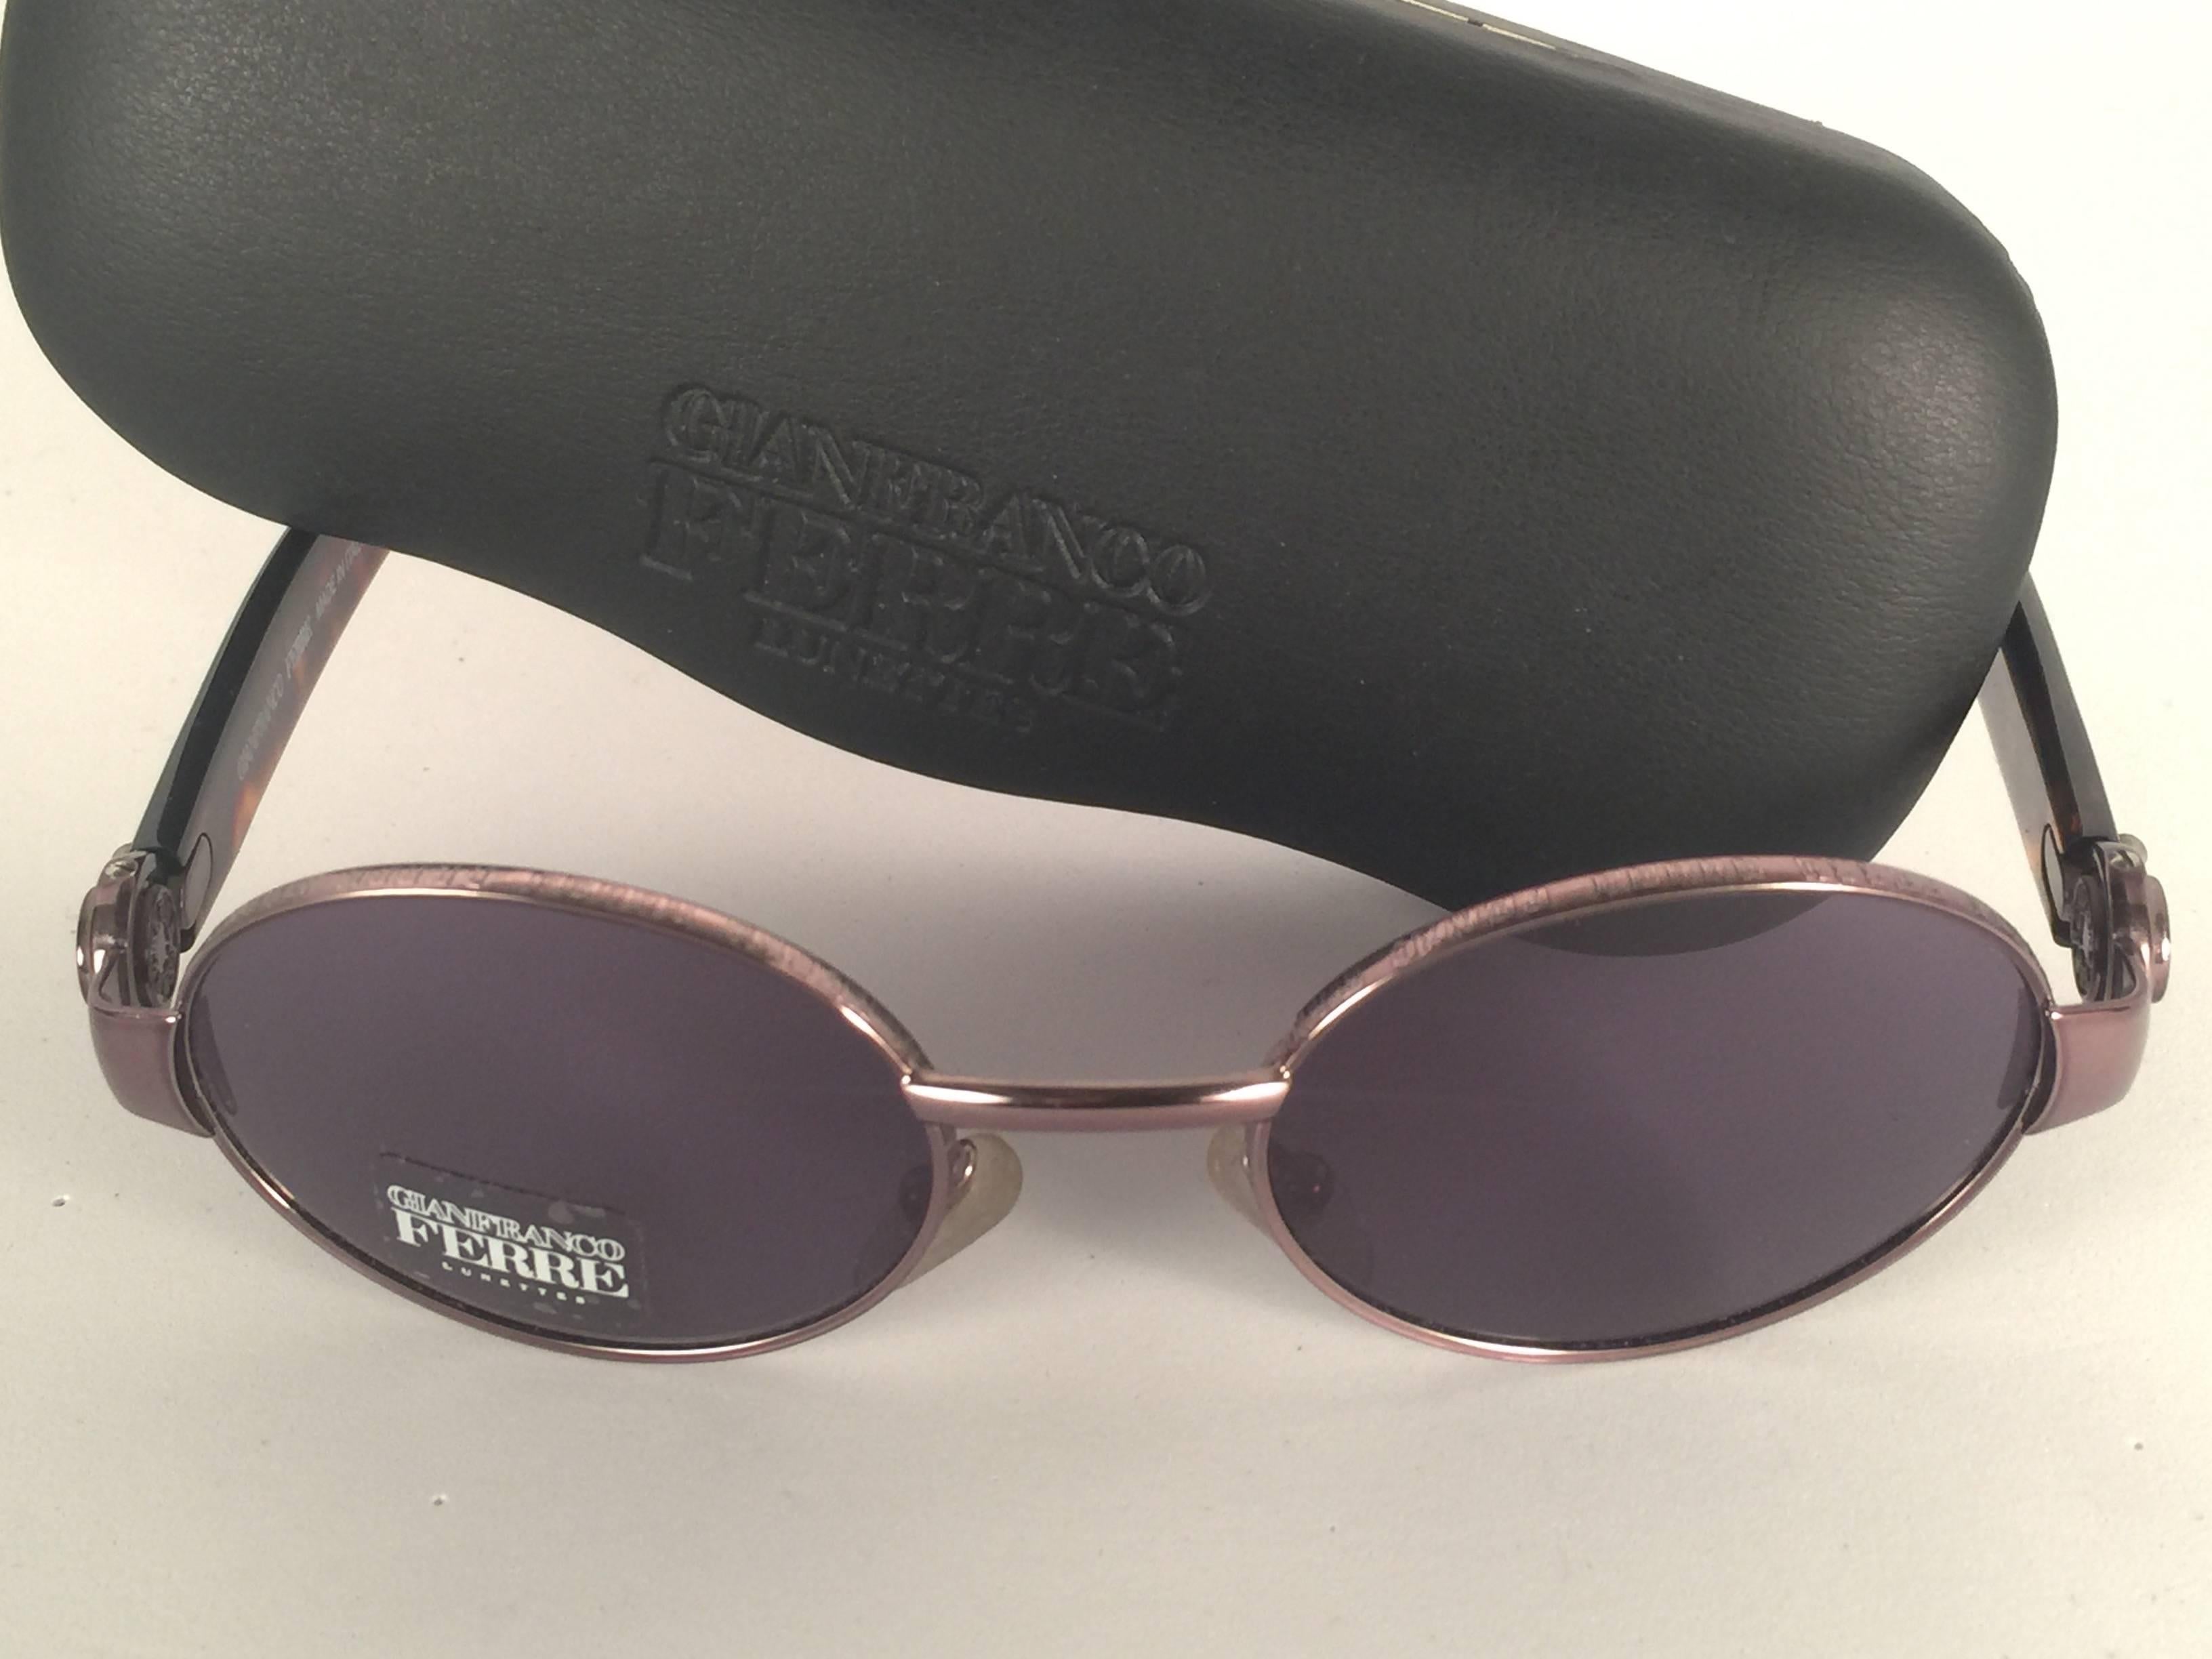 New vintage Gianfranco Ferre sunglasses.    

Oval copper and tortoise frame holding a pair of spotless grey lenses.   

New, never worn or displayed. 

 Made in Italy.